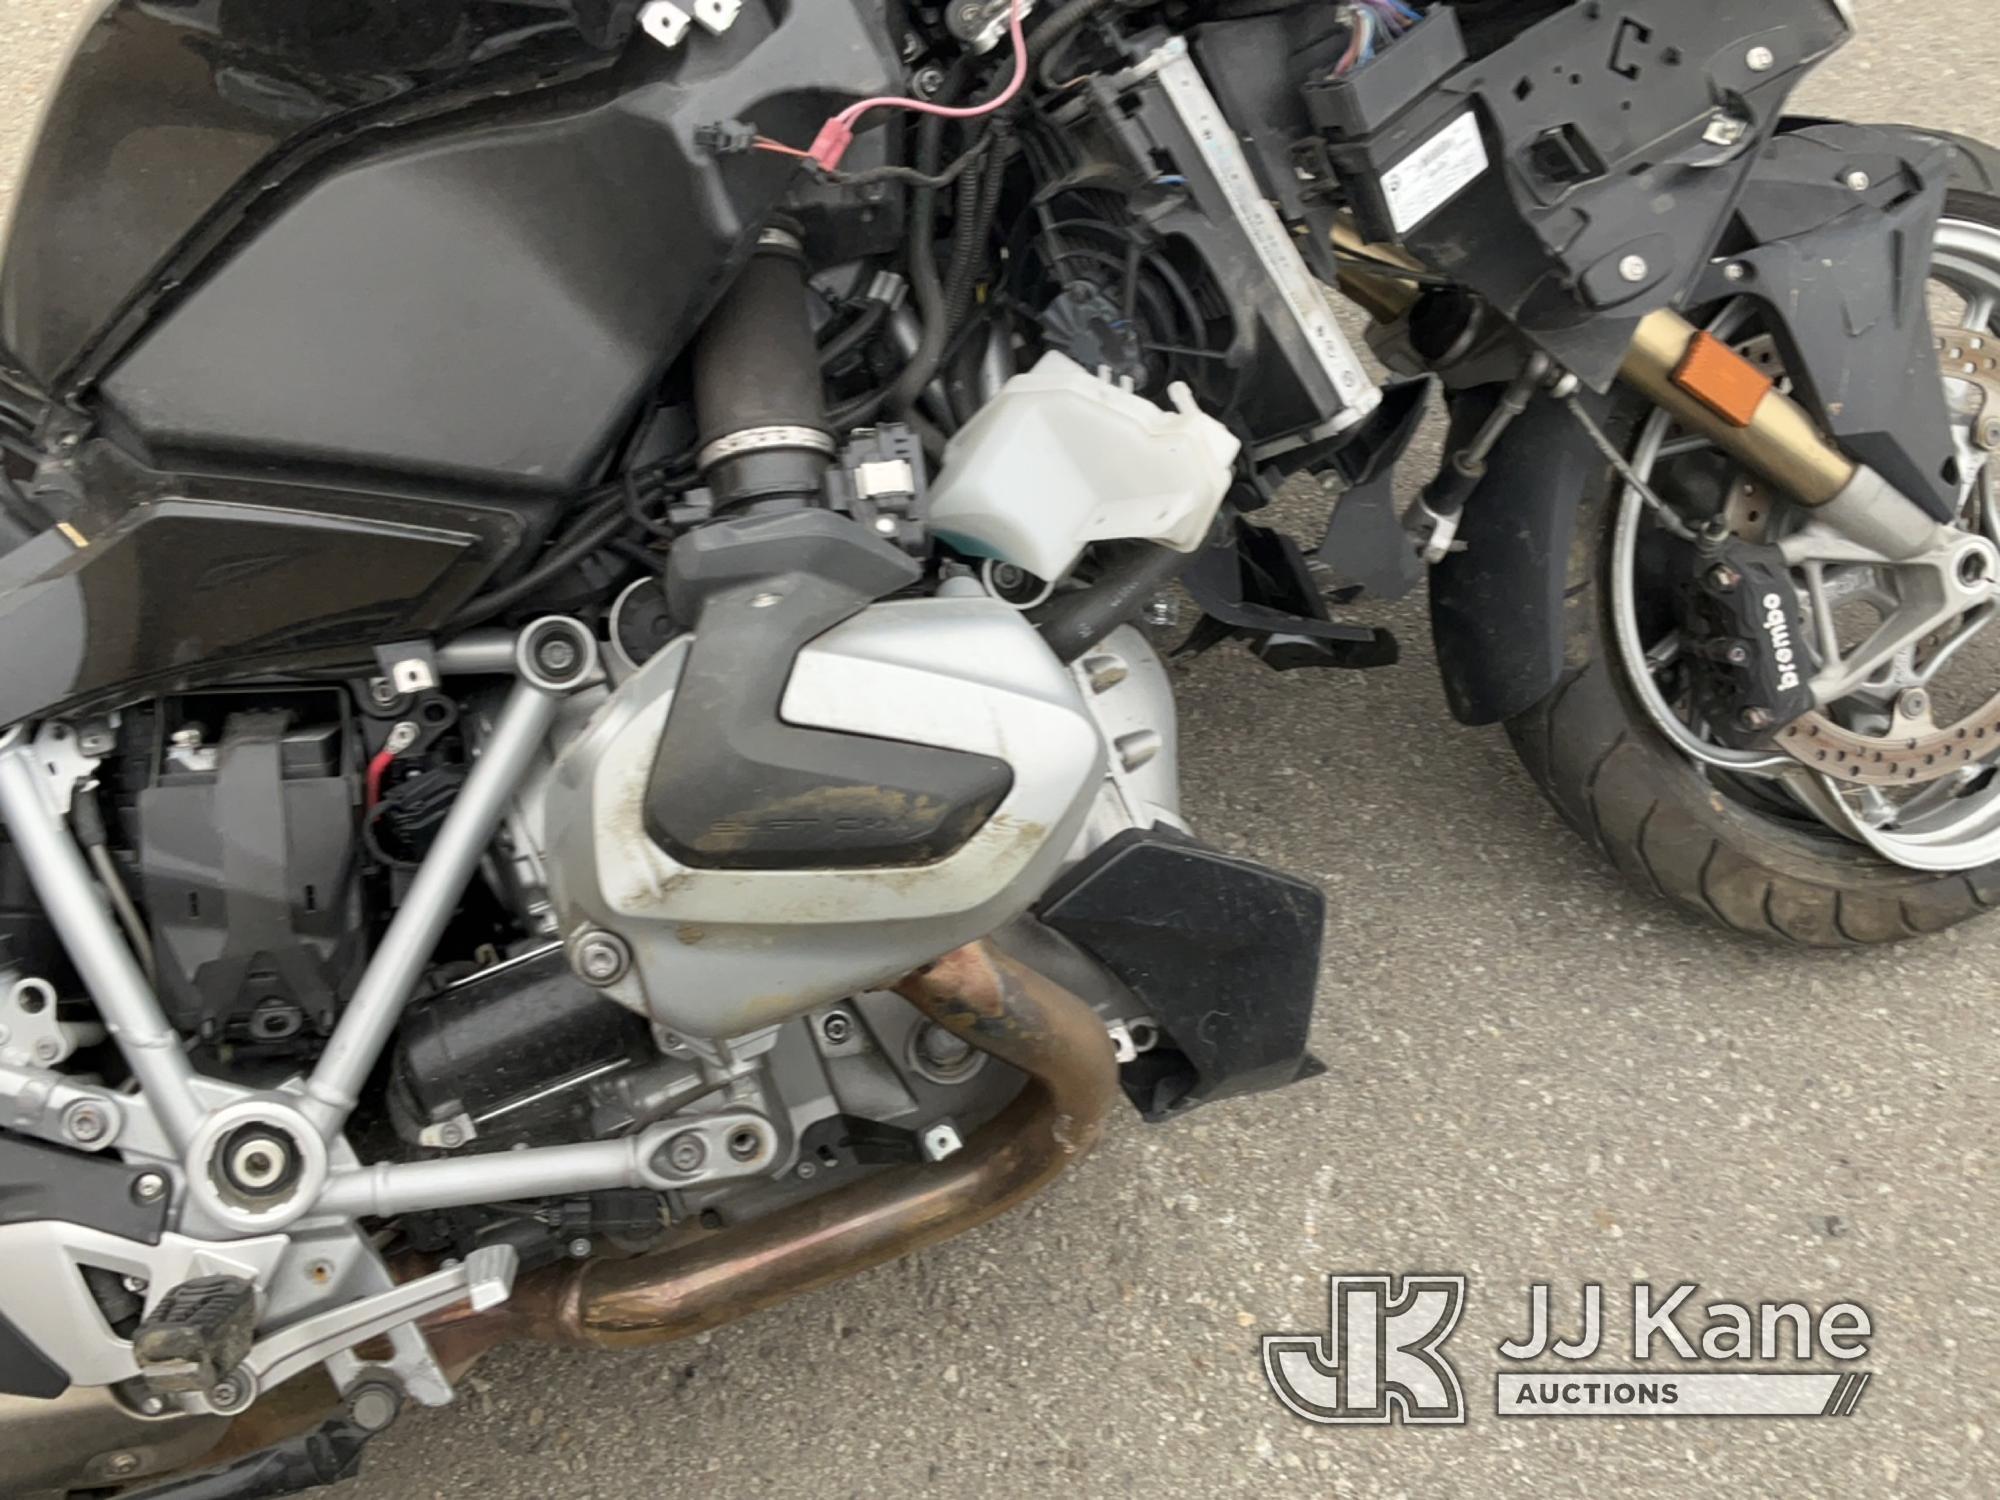 (Jurupa Valley, CA) 2020 BMW R 1250 RT Motorcycle Not Running , No Key , wrecked , Stripped Of Parts